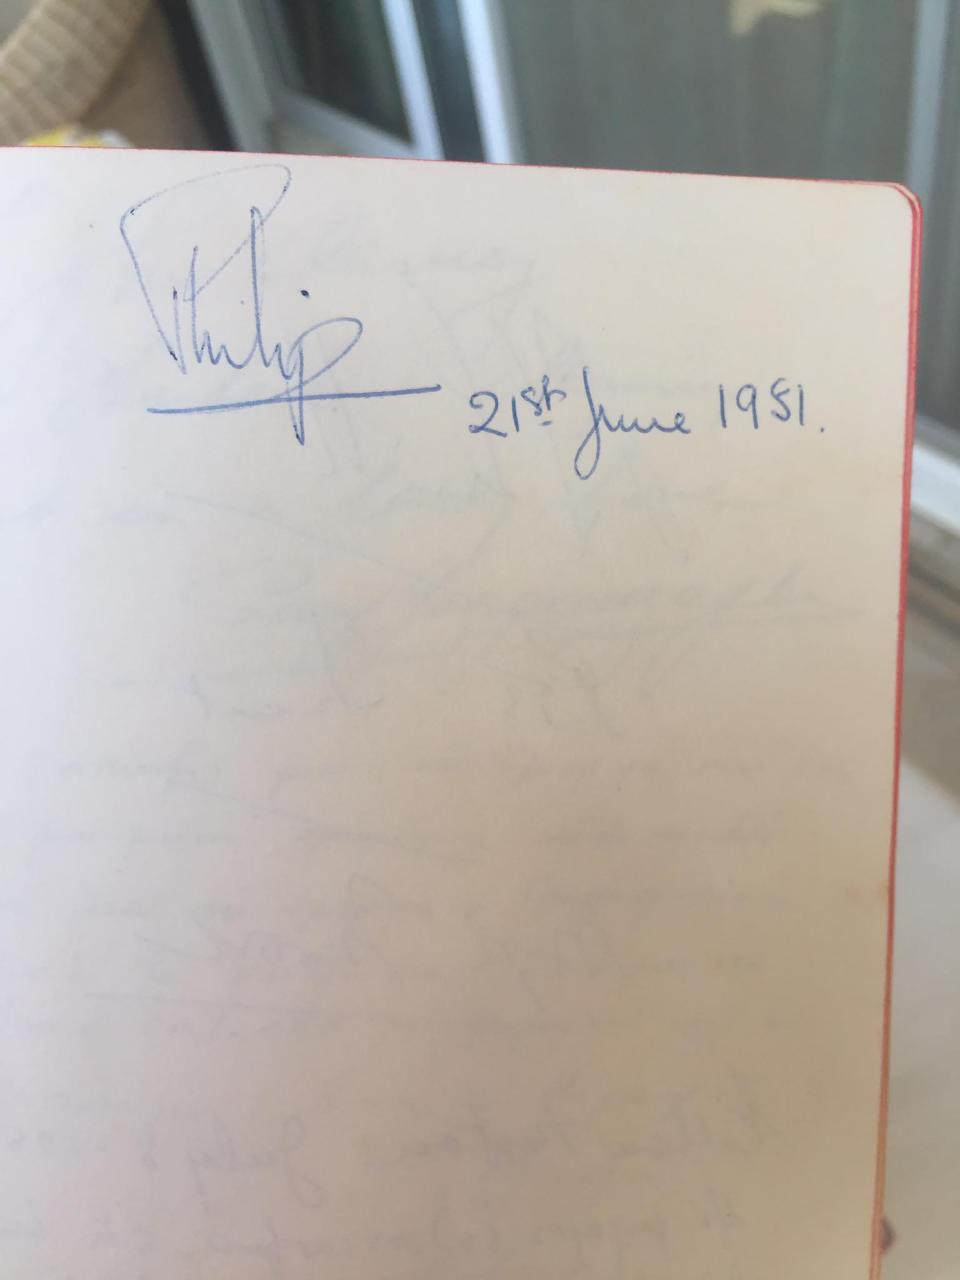 Prince Philip’s signature in the Koukouritsa family guestbook, from his visit on 21 June, 1951Courtesy of the Capodistrias-Desylla family Collection, Corfu